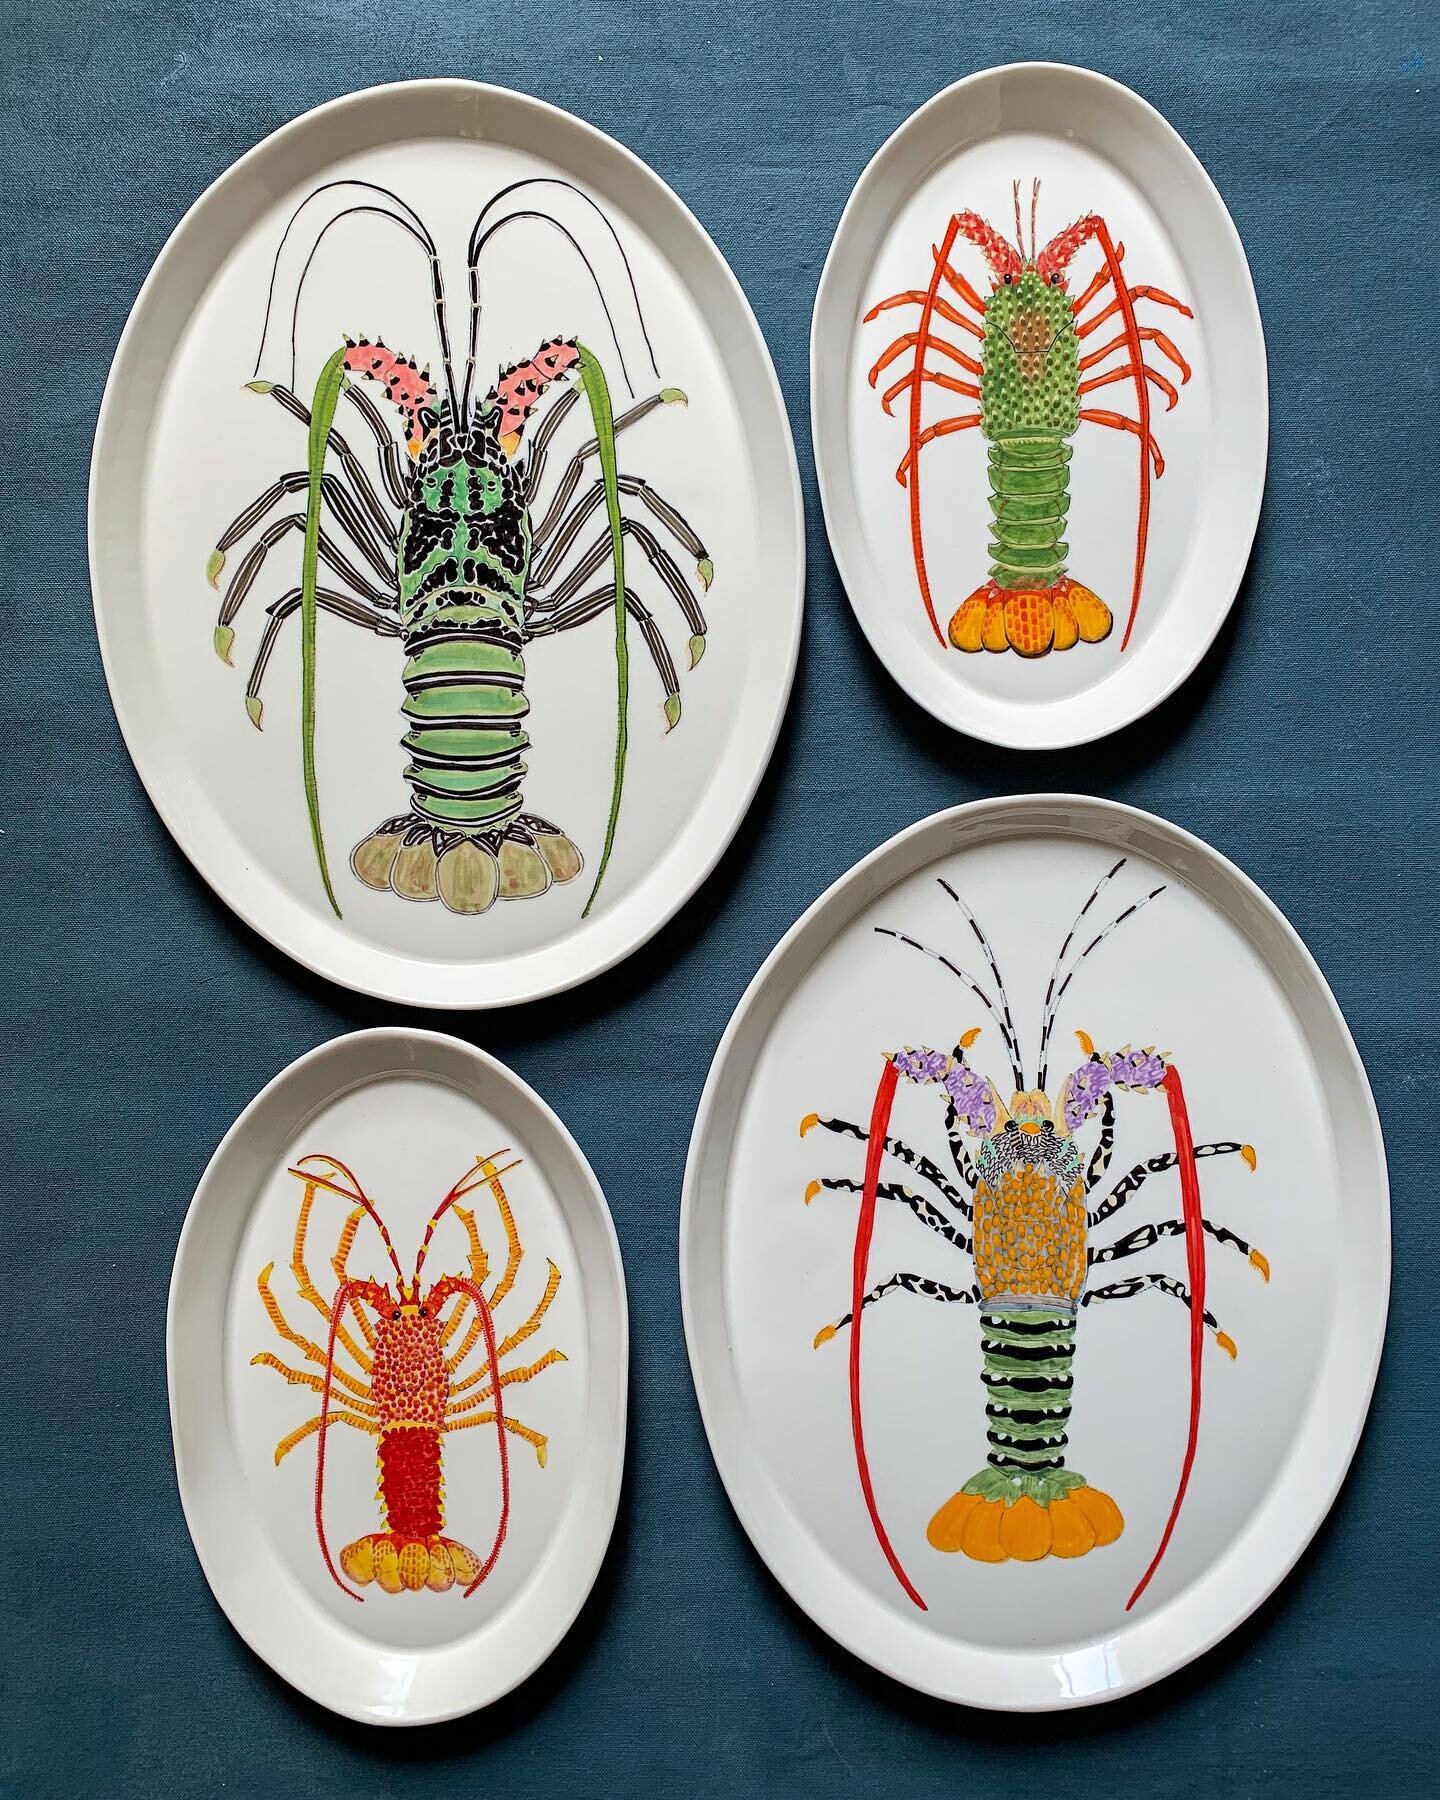 What&rsquo;s the difference between rock lobsters (1st pic) and lobsters (2nd pic)?
🦞
Like prawns 🦐 and crabs 🦀 , lobsters and rock lobsters belong to the order Decapoda and have five pairs of legs on the main part of the body and five pairs of sw